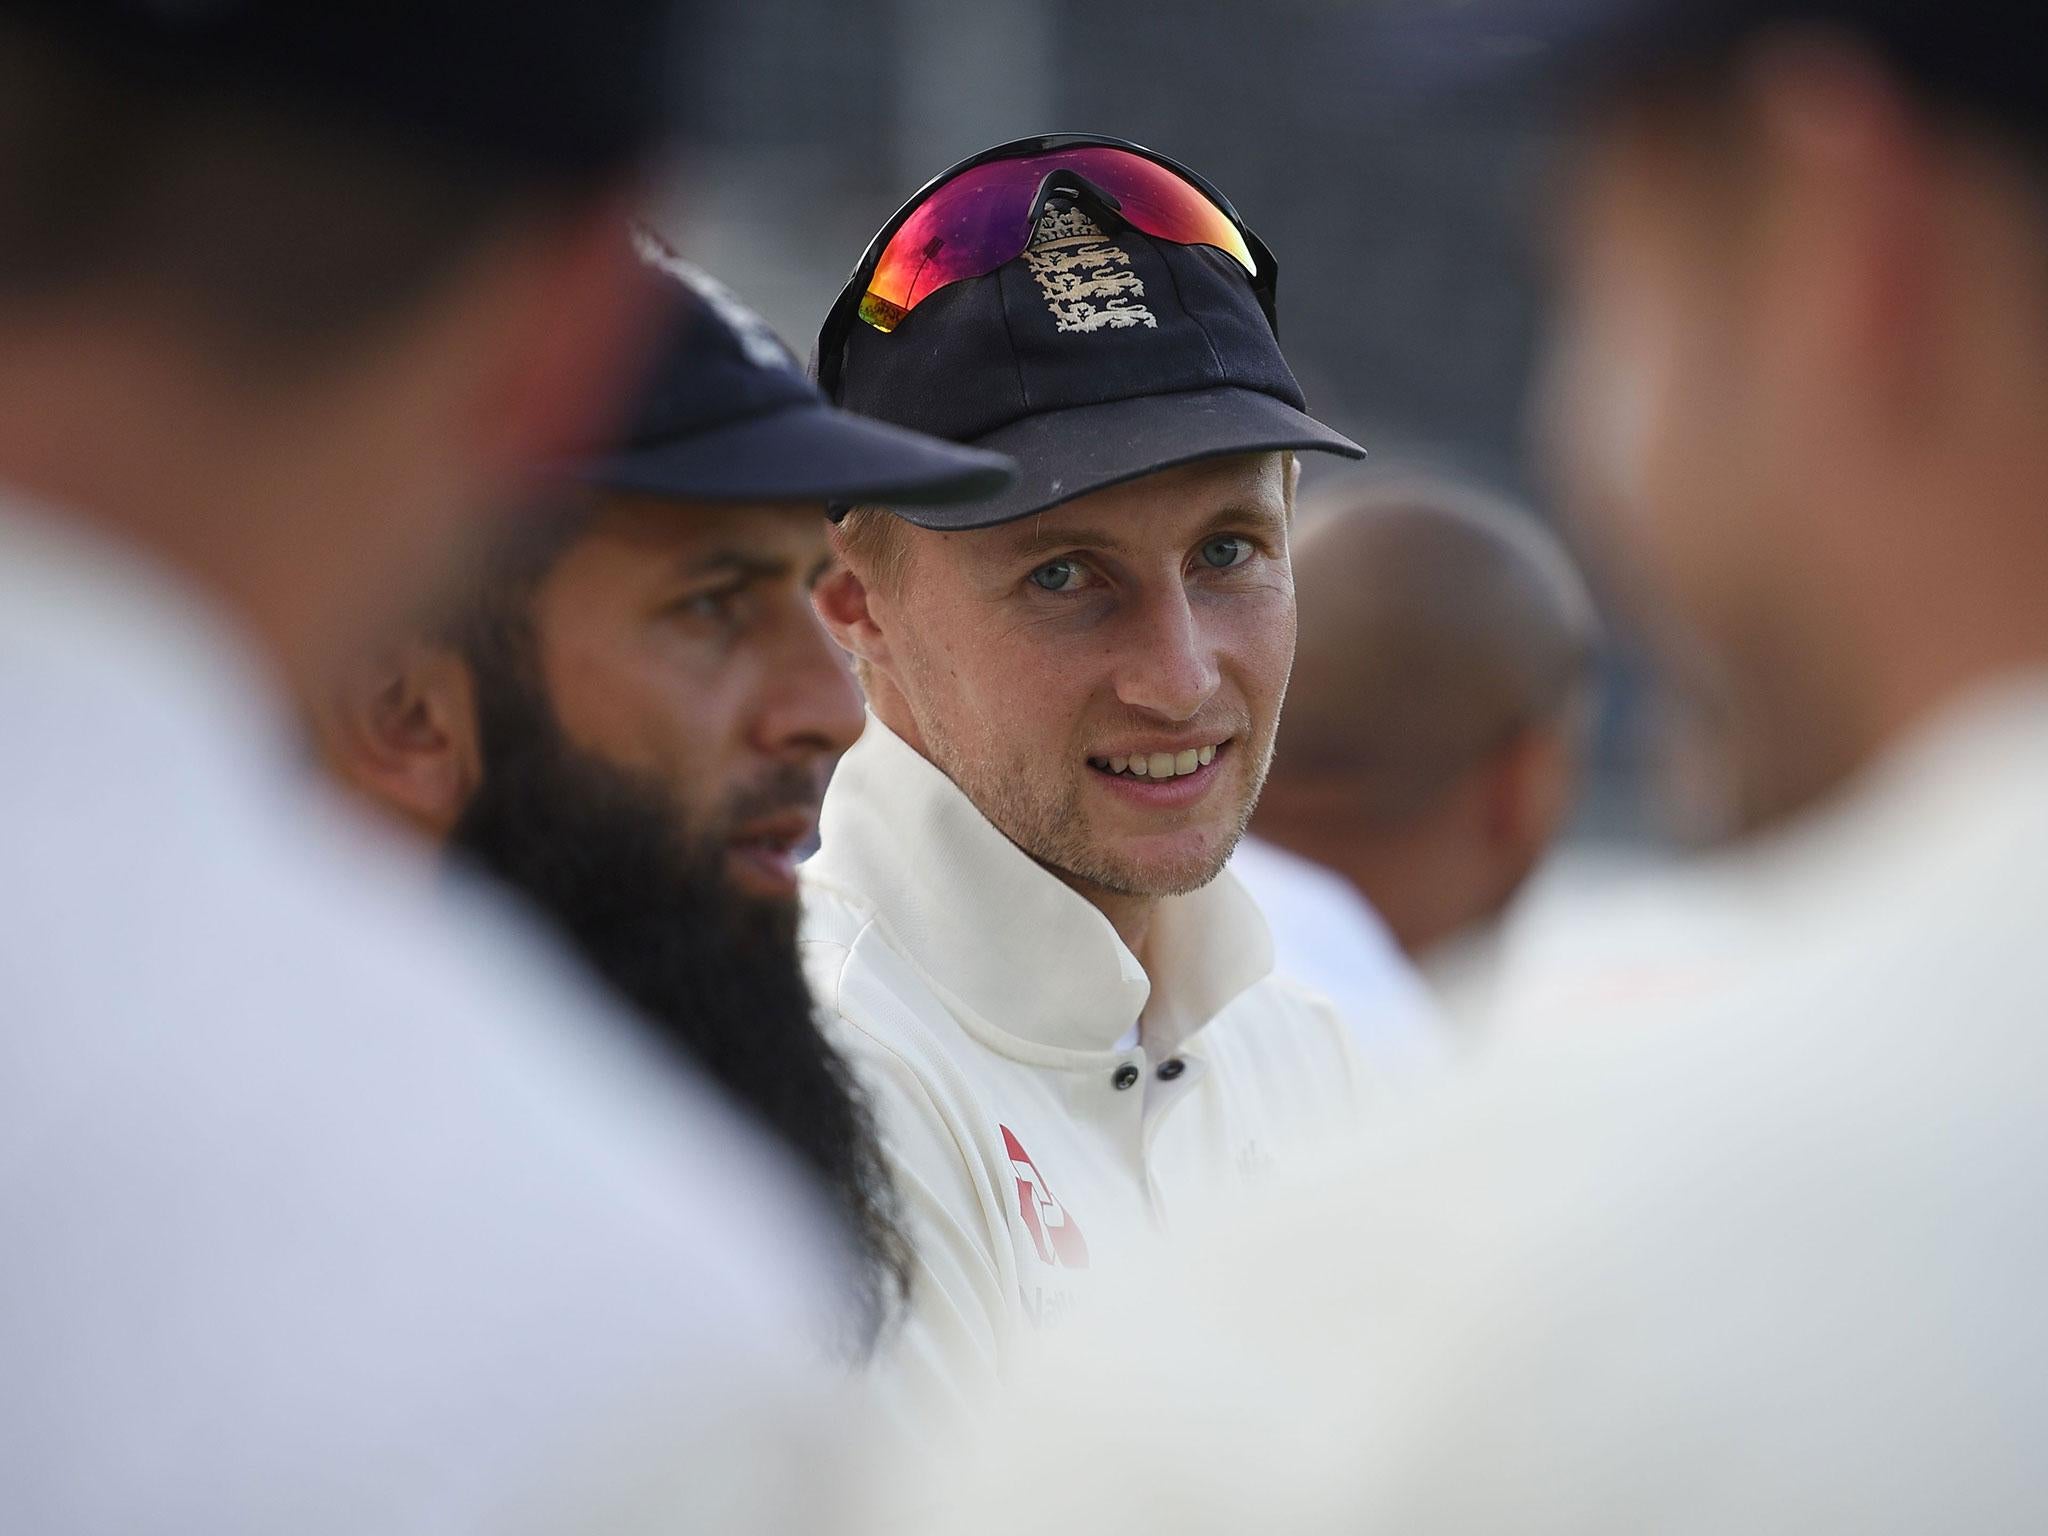 Joe Root was speaking after his first Test series victory as England captain